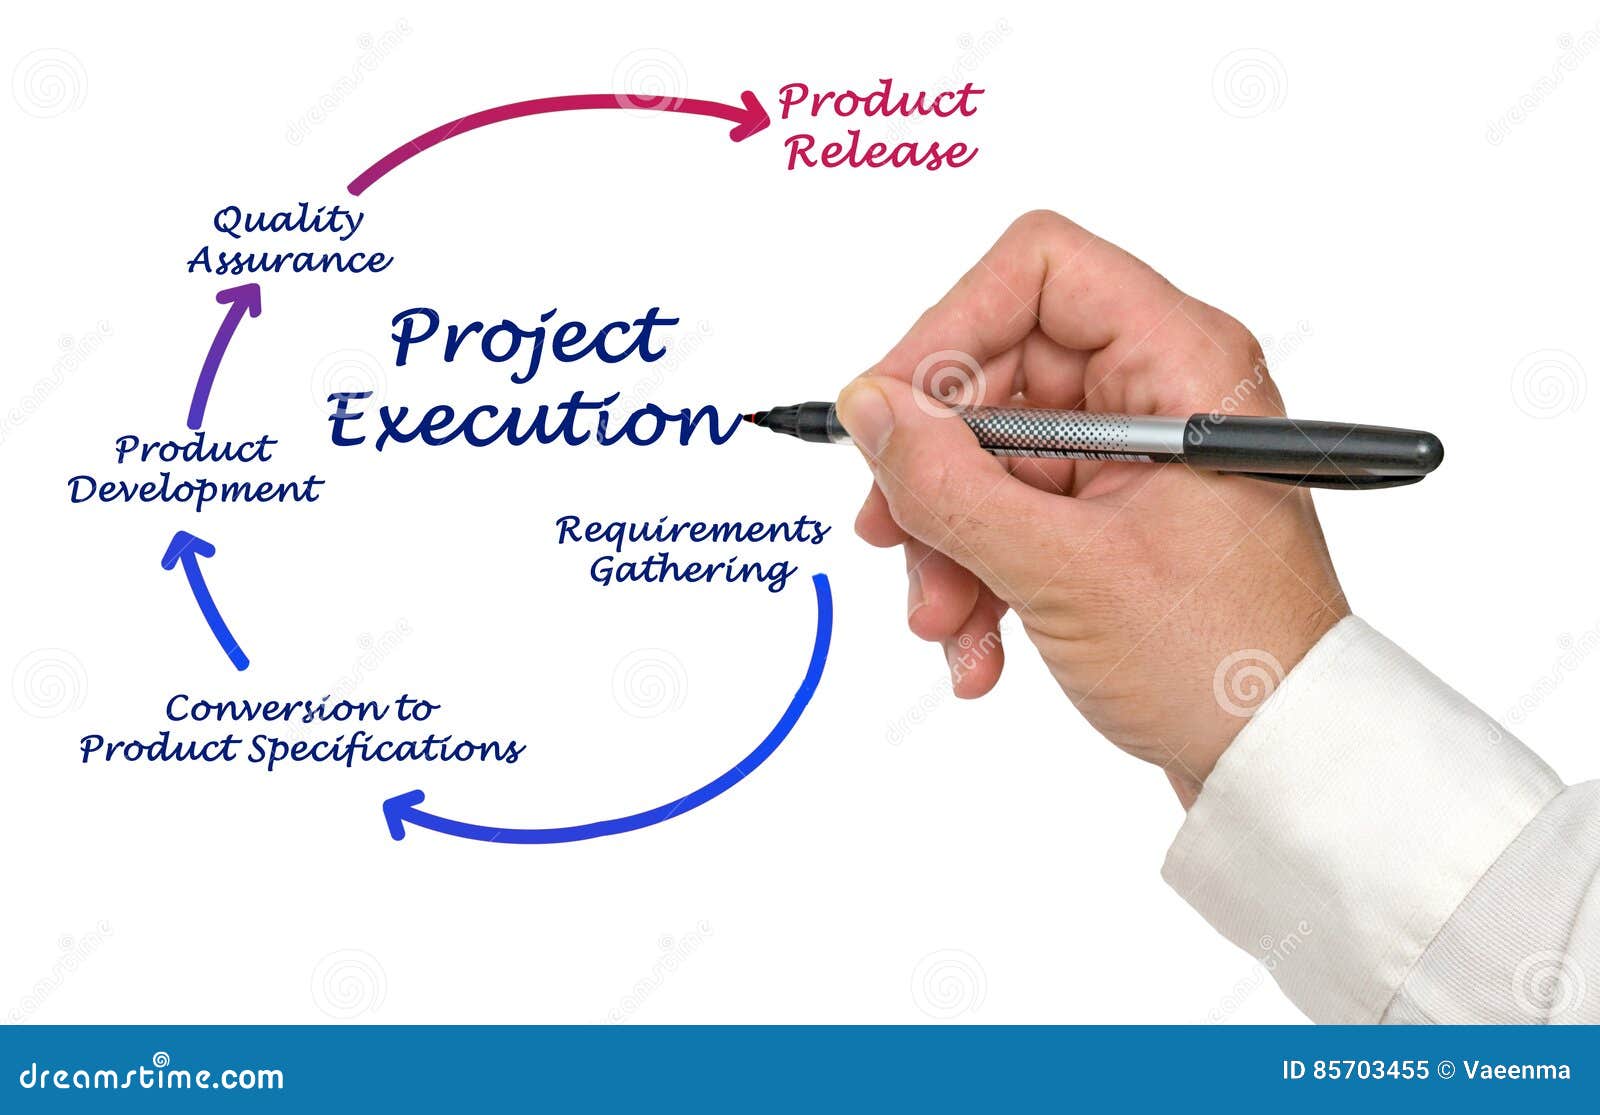 Project Execution Model